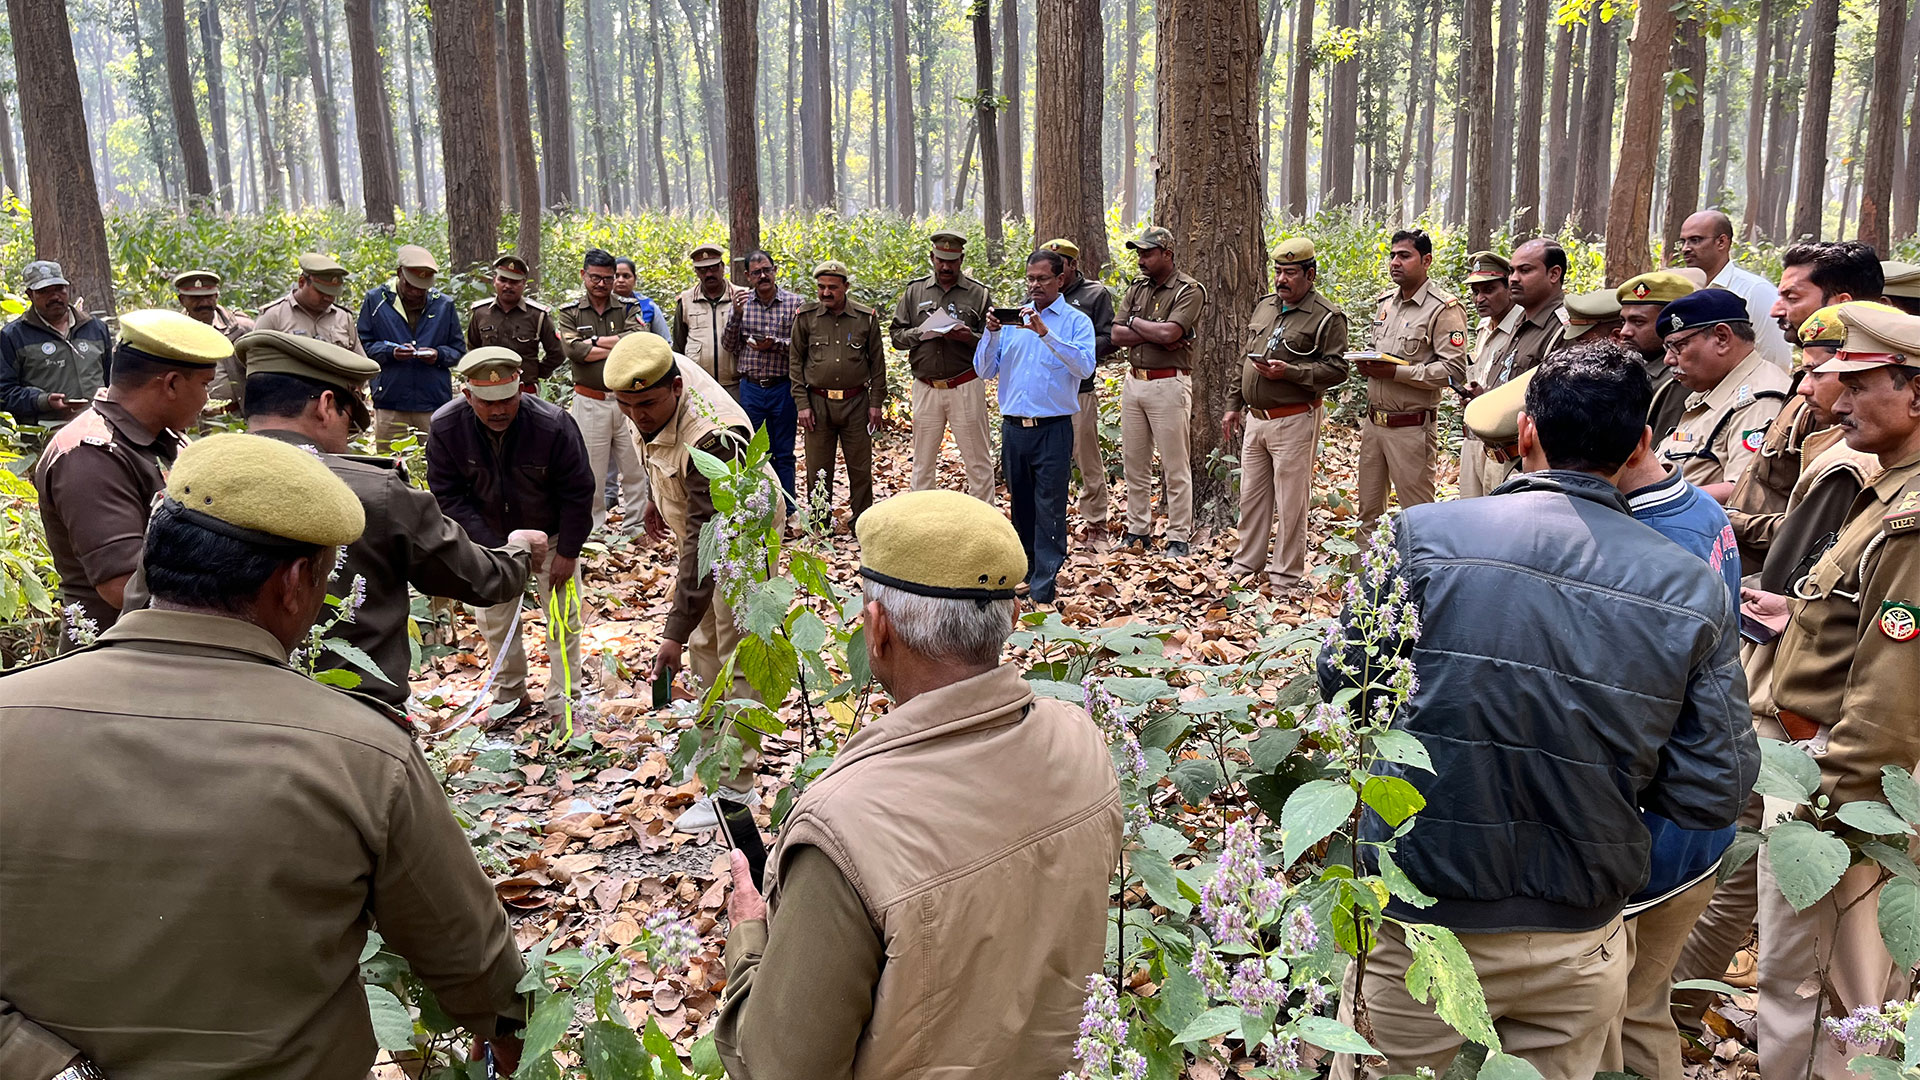 Forest officers at a familiarization session on the Van System, at Wayanad, Kerala, the southernmost state in India. Over 5000 forest officers have been familiarized with the use of the tool